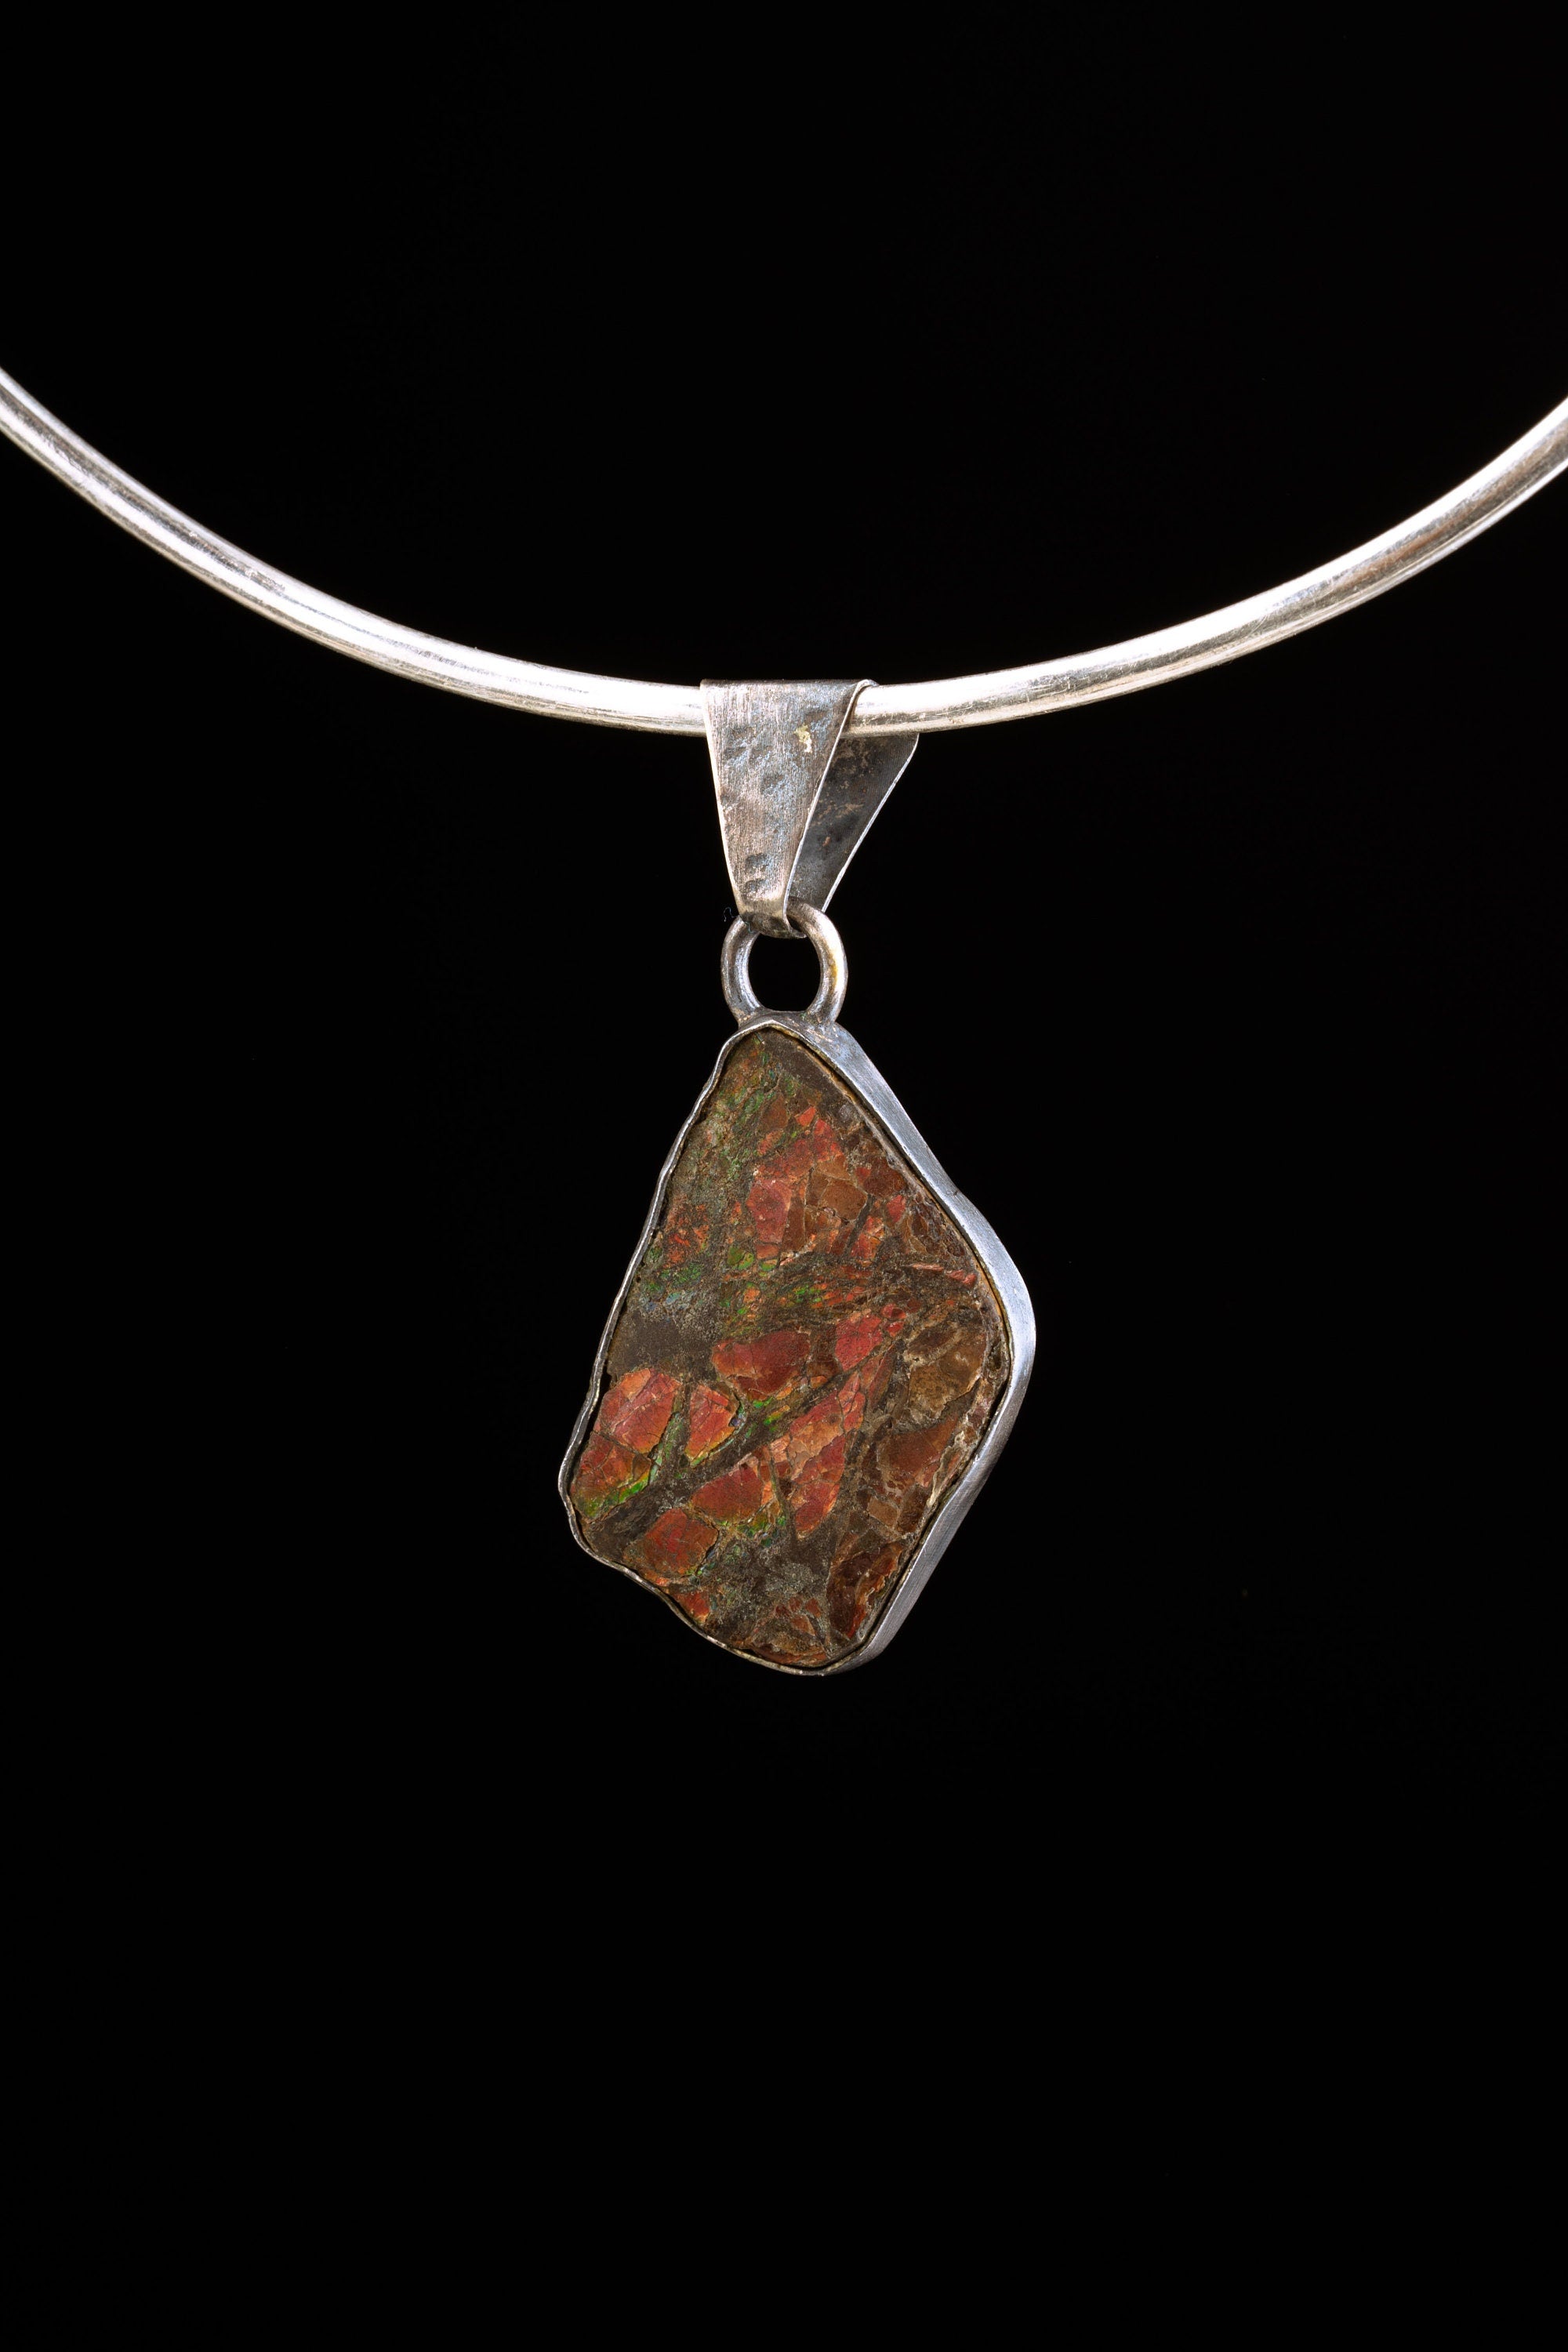 Opalized fossilised ammonite - Natural Opal - Textured 925 Silver Setting - Crystal Pendant Neckpiece